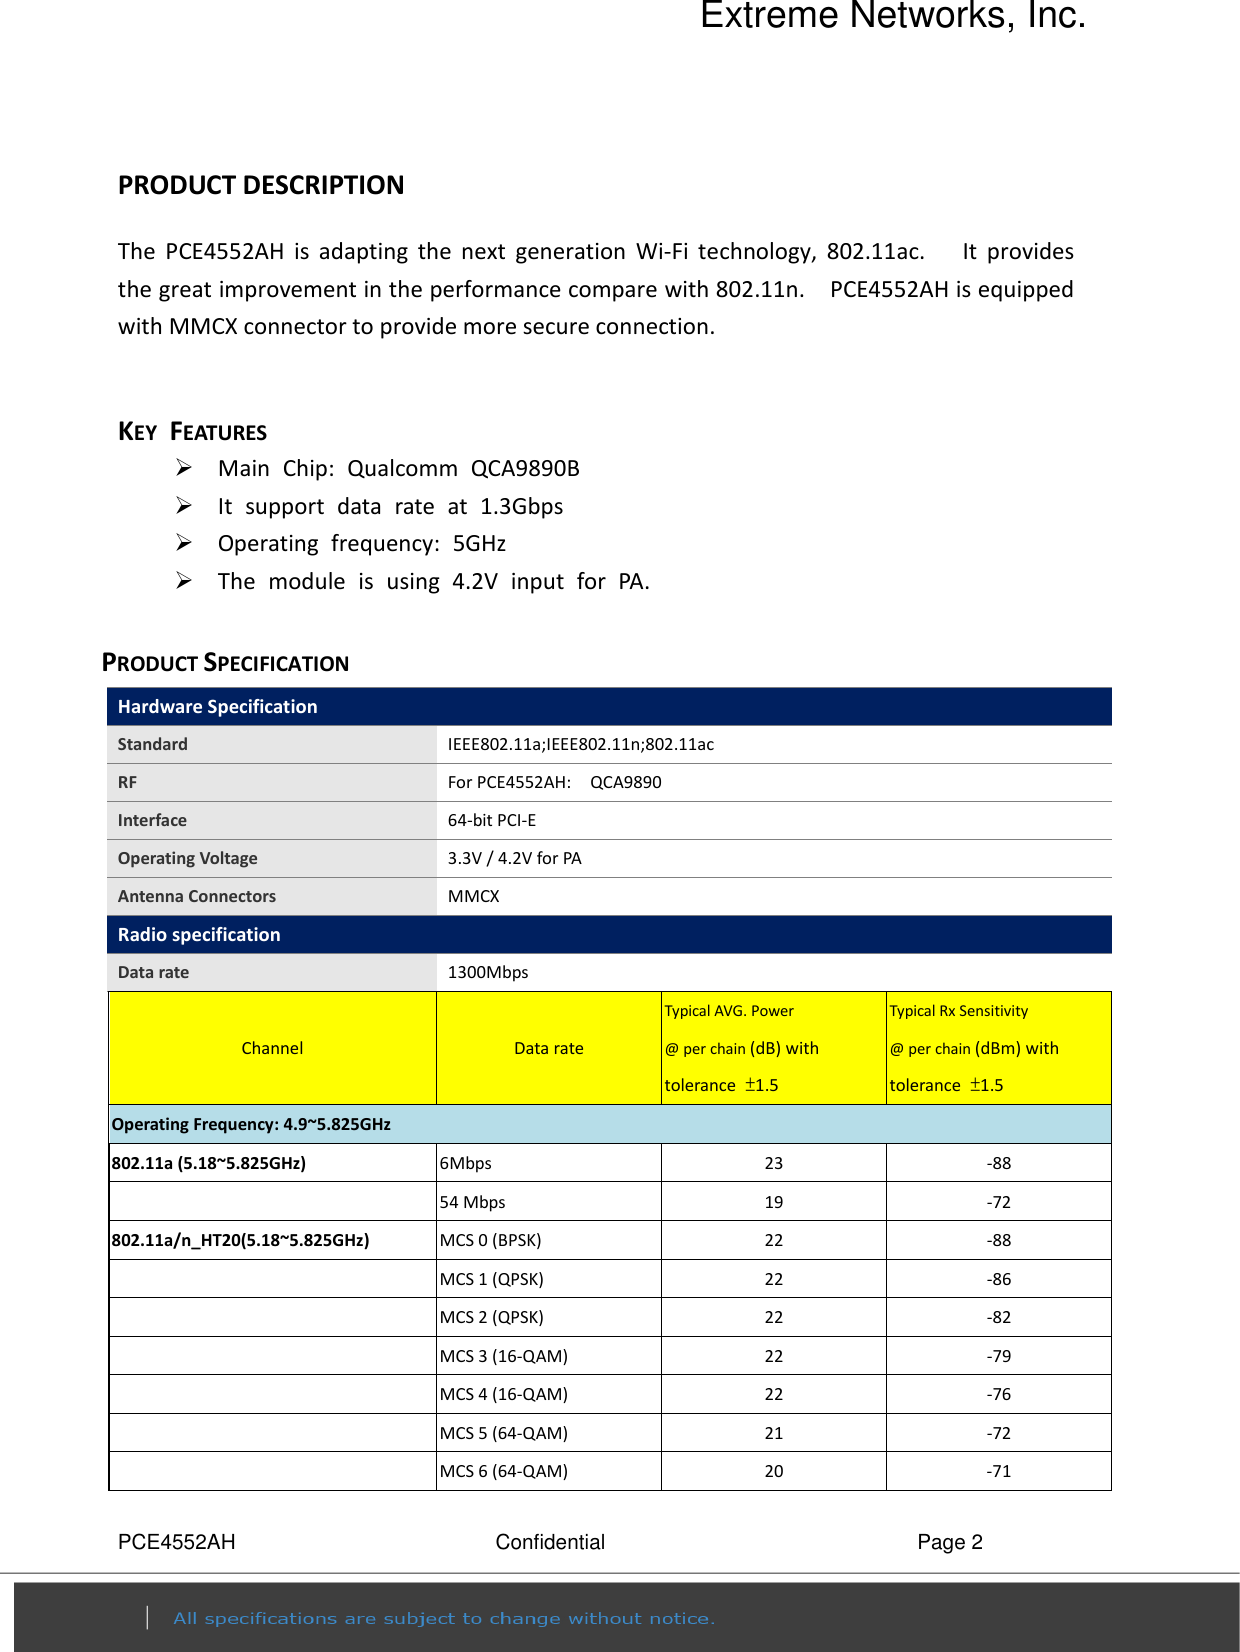 Extreme Networks, Inc. PCE4552AH  Confidential  Page 2  PRODUCT DESCRIPTION                       The  PCE4552AH  is  adapting  the  next  generation  Wi-Fi  technology,  802.11ac.      It  provides the great improvement in the performance compare with 802.11n.    PCE4552AH is equipped with MMCX connector to provide more secure connection.  KEY FEATURES    Main  Chip:  Qualcomm  QCA9890B    It  support  data  rate  at  1.3Gbps  Operating  frequency:  5GHz    The  module  is  using  4.2V  input  for  PA.  PRODUCT SPECIFICATION Hardware Specification  Standard  IEEE802.11a;IEEE802.11n;802.11ac RF    For PCE4552AH:    QCA9890 Interface  64-bit PCI-E   Operating Voltage  3.3V / 4.2V for PA Antenna Connectors  MMCX Radio specification  Data rate  1300Mbps Channel  Data rate Typical AVG. Power   @ per chain (dB) with tolerance  ±1.5 Typical Rx Sensitivity @ per chain (dBm) with tolerance  ±1.5 Operating Frequency: 4.9~5.825GHz     802.11a (5.18~5.825GHz)  6Mbps  23  -88  54 Mbps  19  -72 802.11a/n_HT20(5.18~5.825GHz)  MCS 0 (BPSK)  22  -88  MCS 1 (QPSK)  22  -86  MCS 2 (QPSK)  22  -82  MCS 3 (16-QAM)  22  -79  MCS 4 (16-QAM)  22  -76  MCS 5 (64-QAM)  21  -72  MCS 6 (64-QAM)  20  -71 